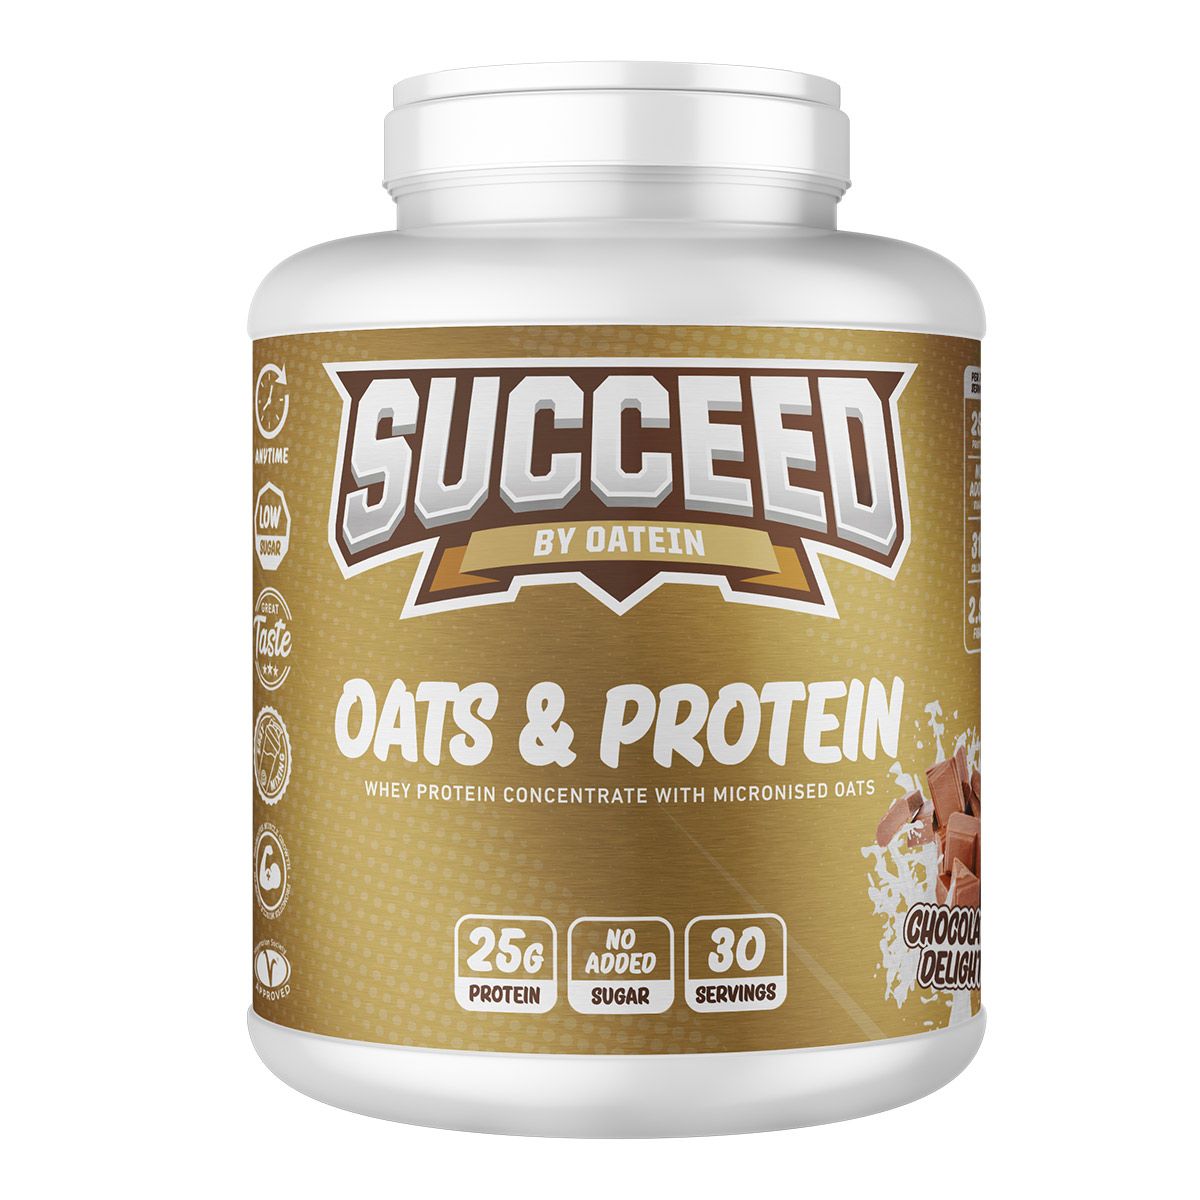 Oatein Succeed Oats & Whey Protein - Chocolate Cream 2.2kg